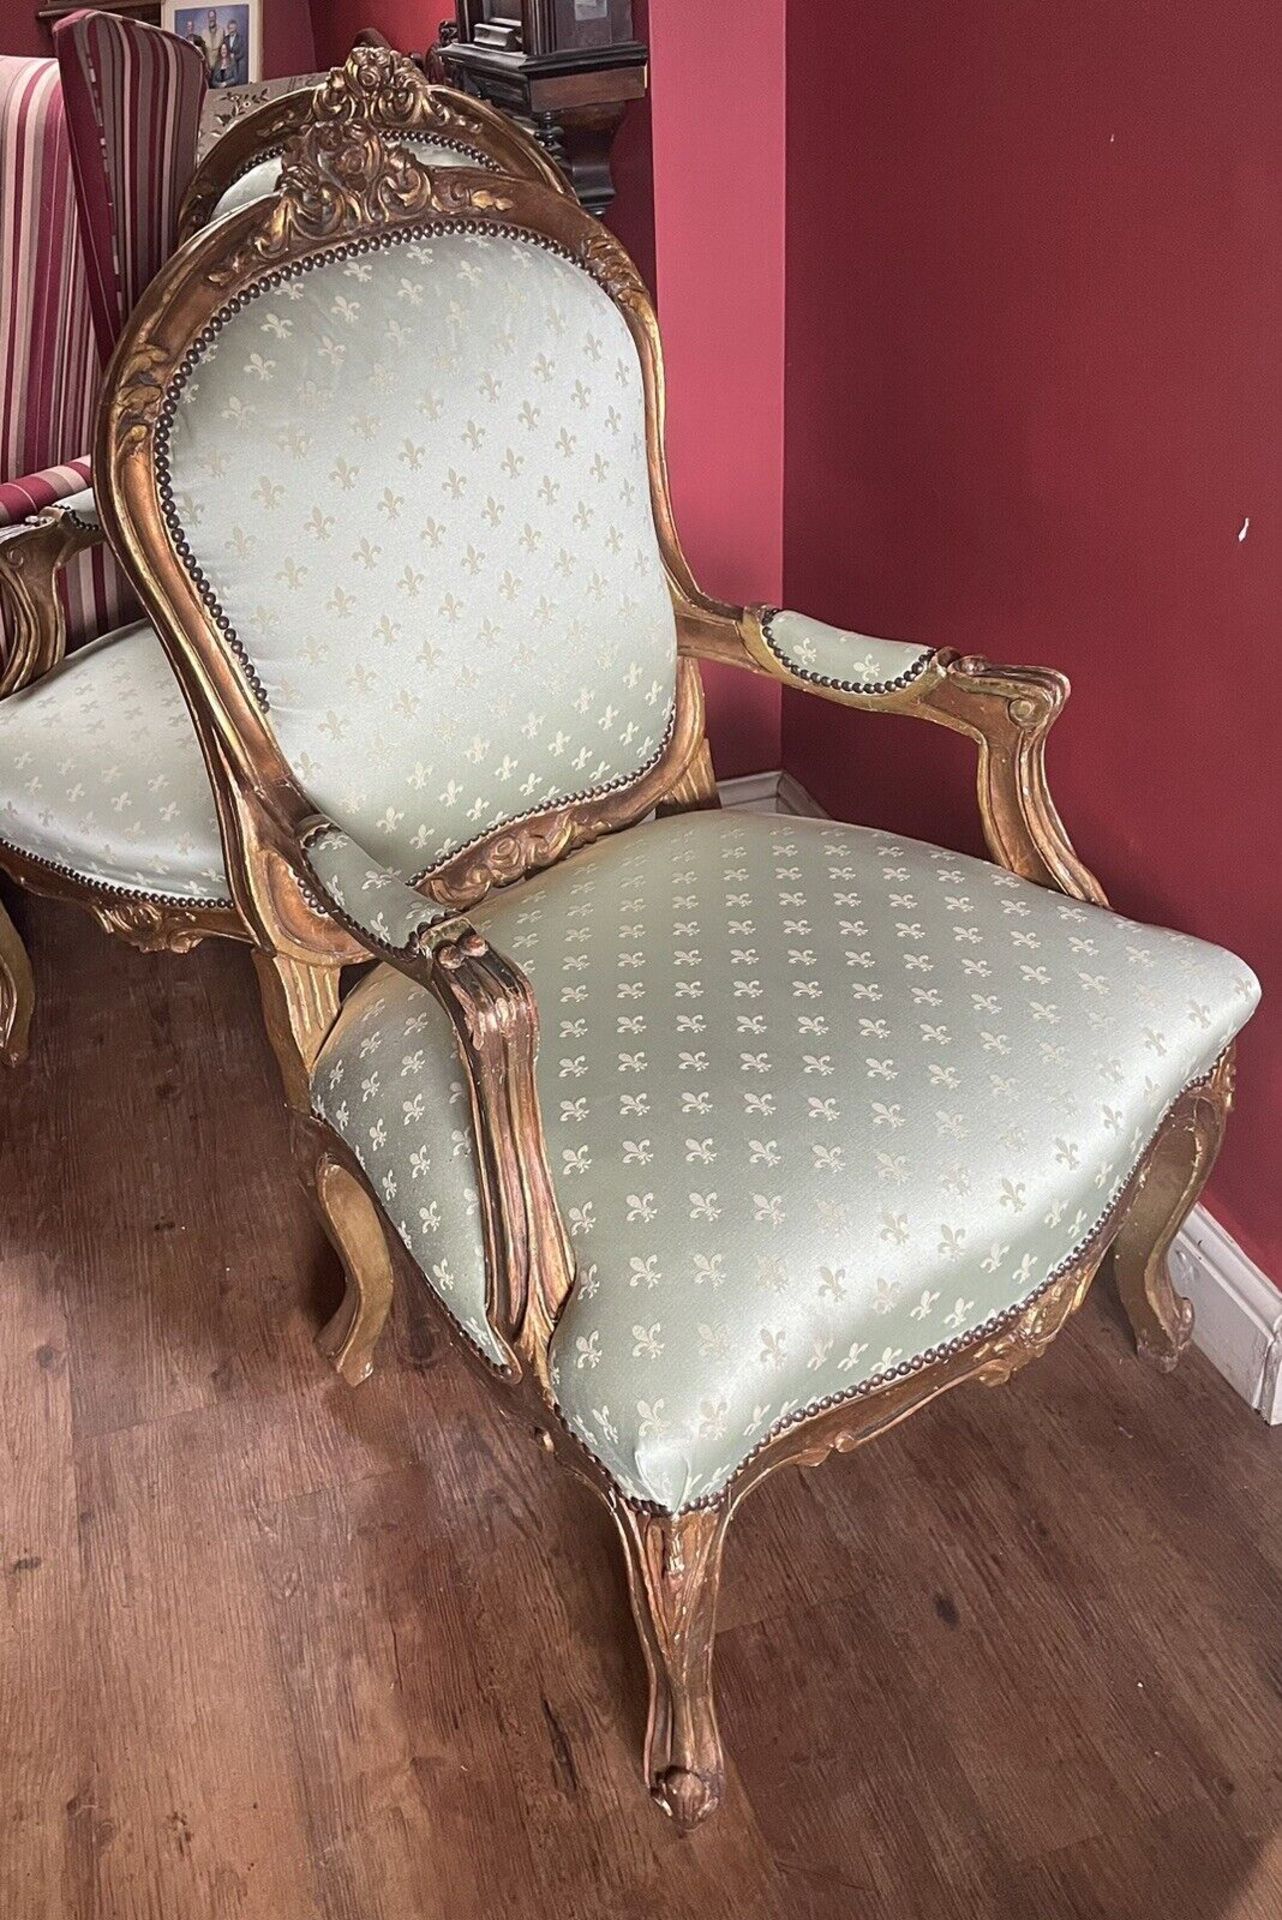 A Pair of Fauteuils In Louis XVI Style Carved Gilt Wood Arm Chairs Upholstered In Fleur De Lys - Image 10 of 10